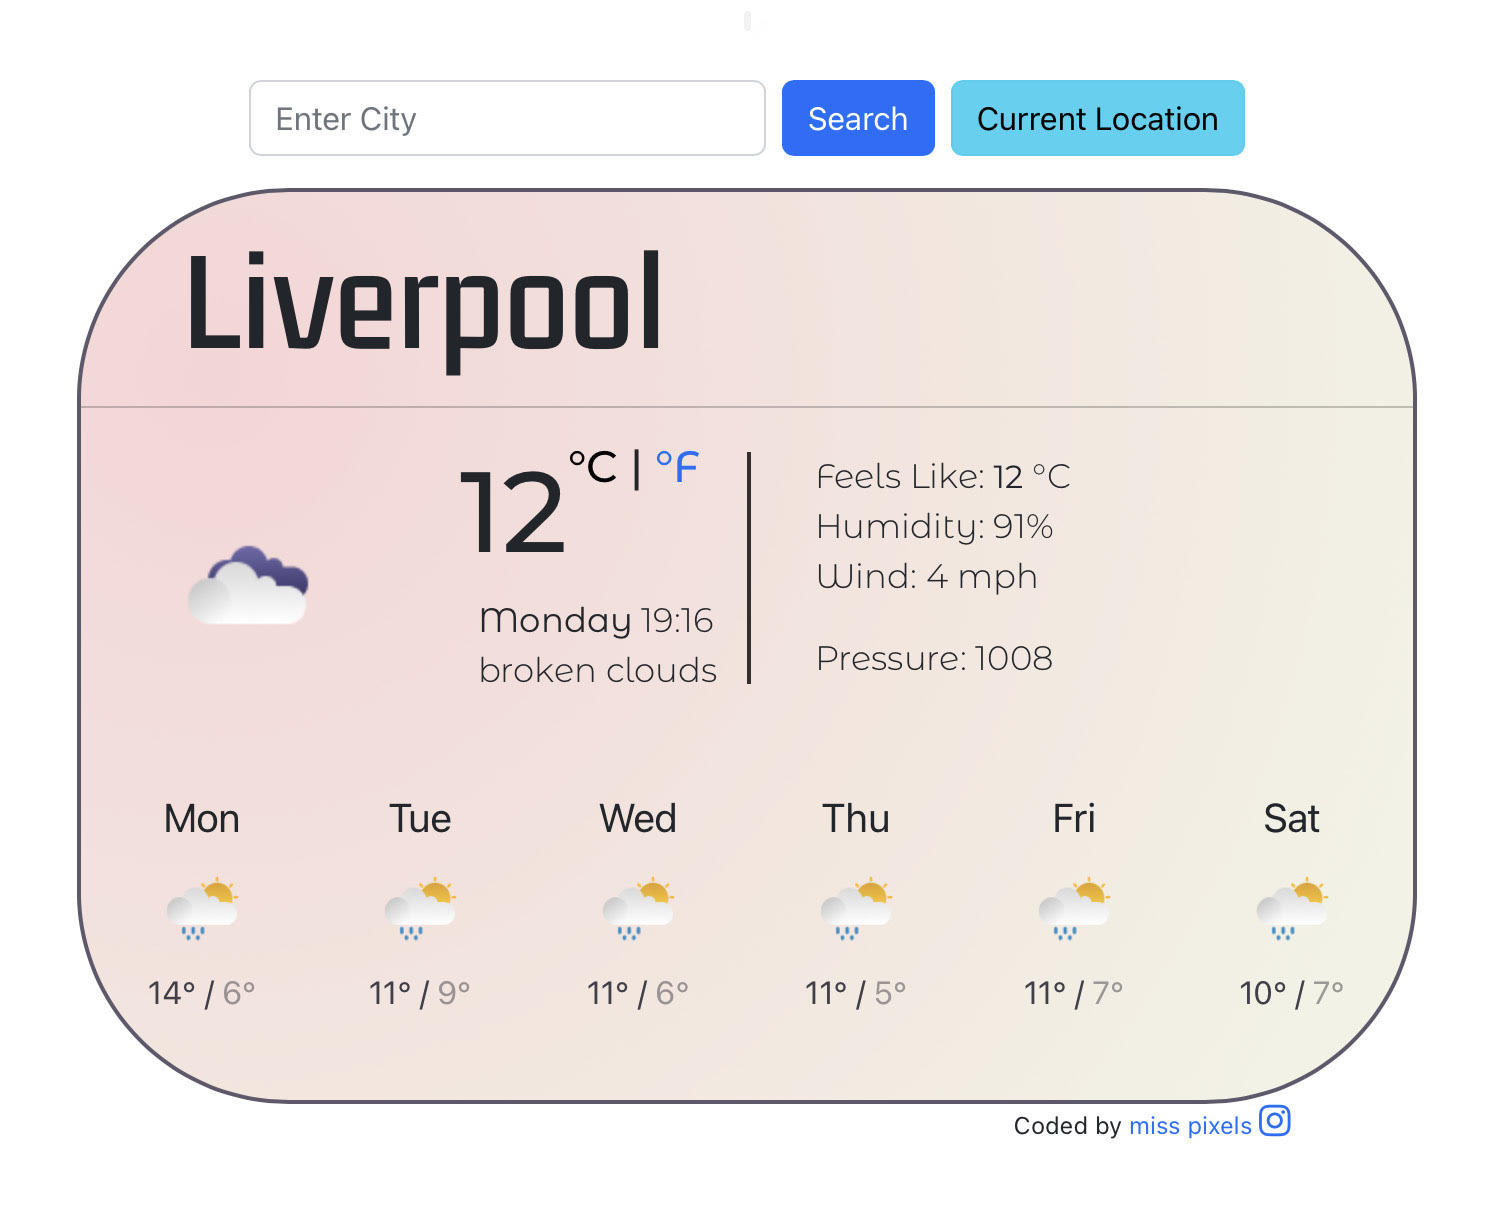 image showing a weather app